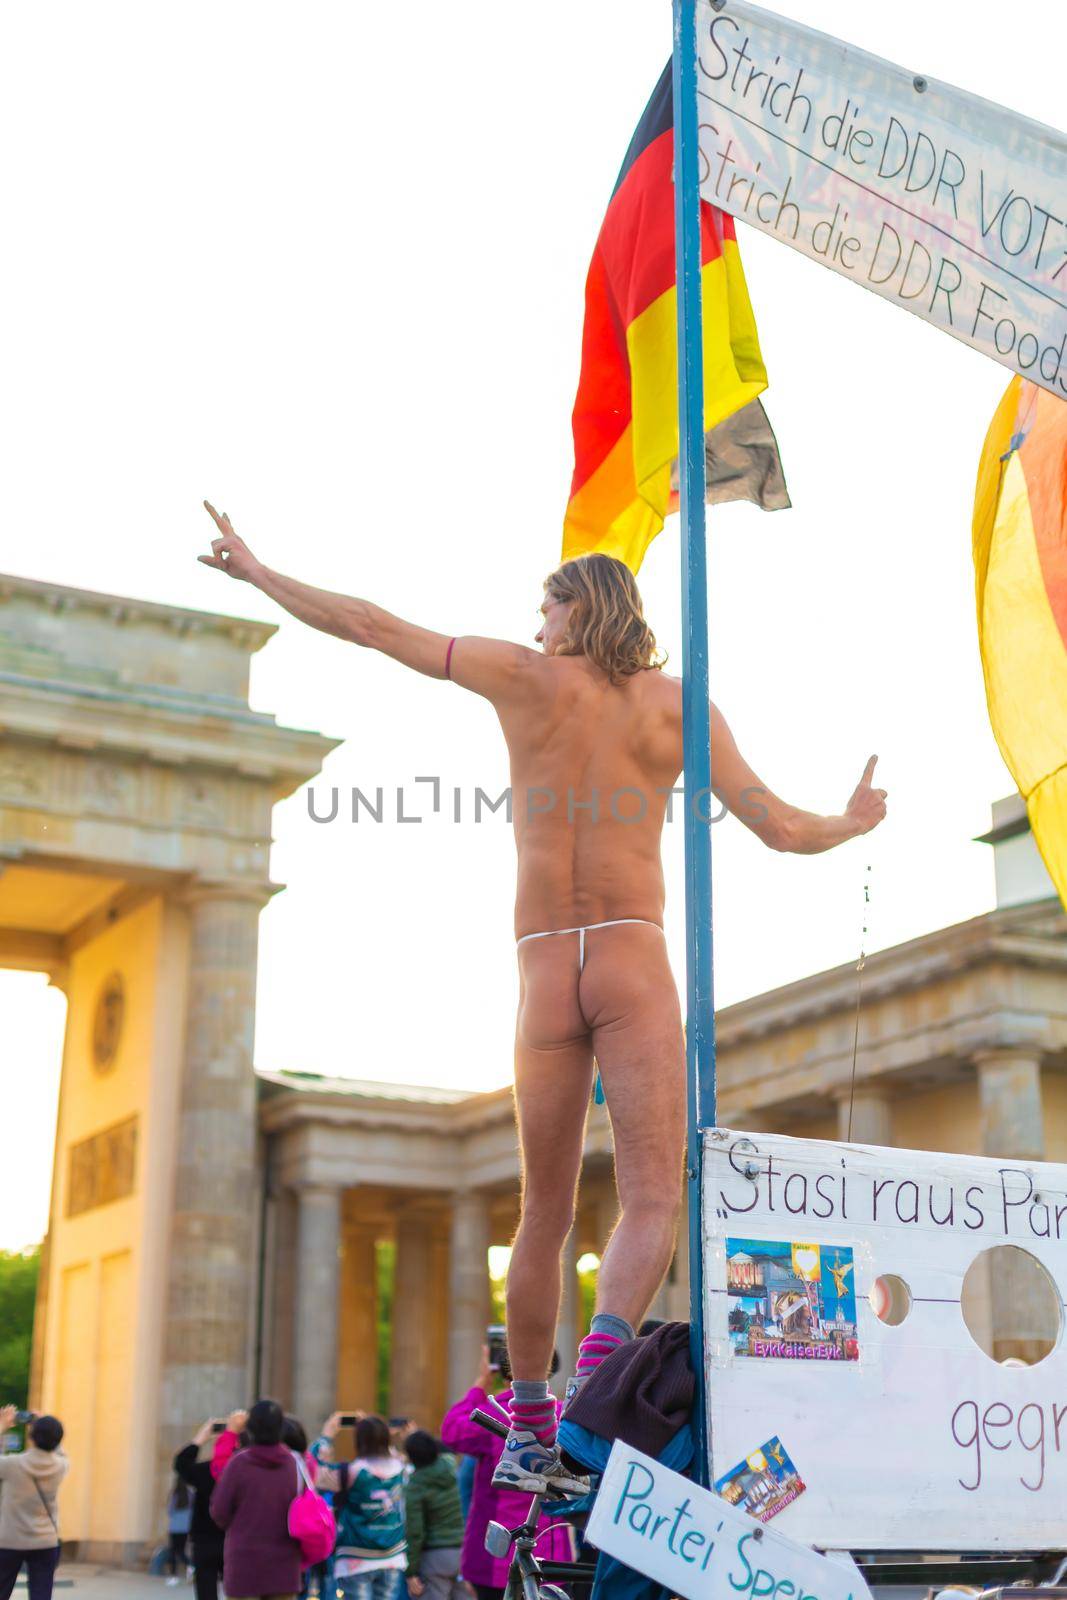 The crowd walks in the square in front of the Brandenburg Gate. Performance of a naked man. Berlin, Germany - 05.17.2019